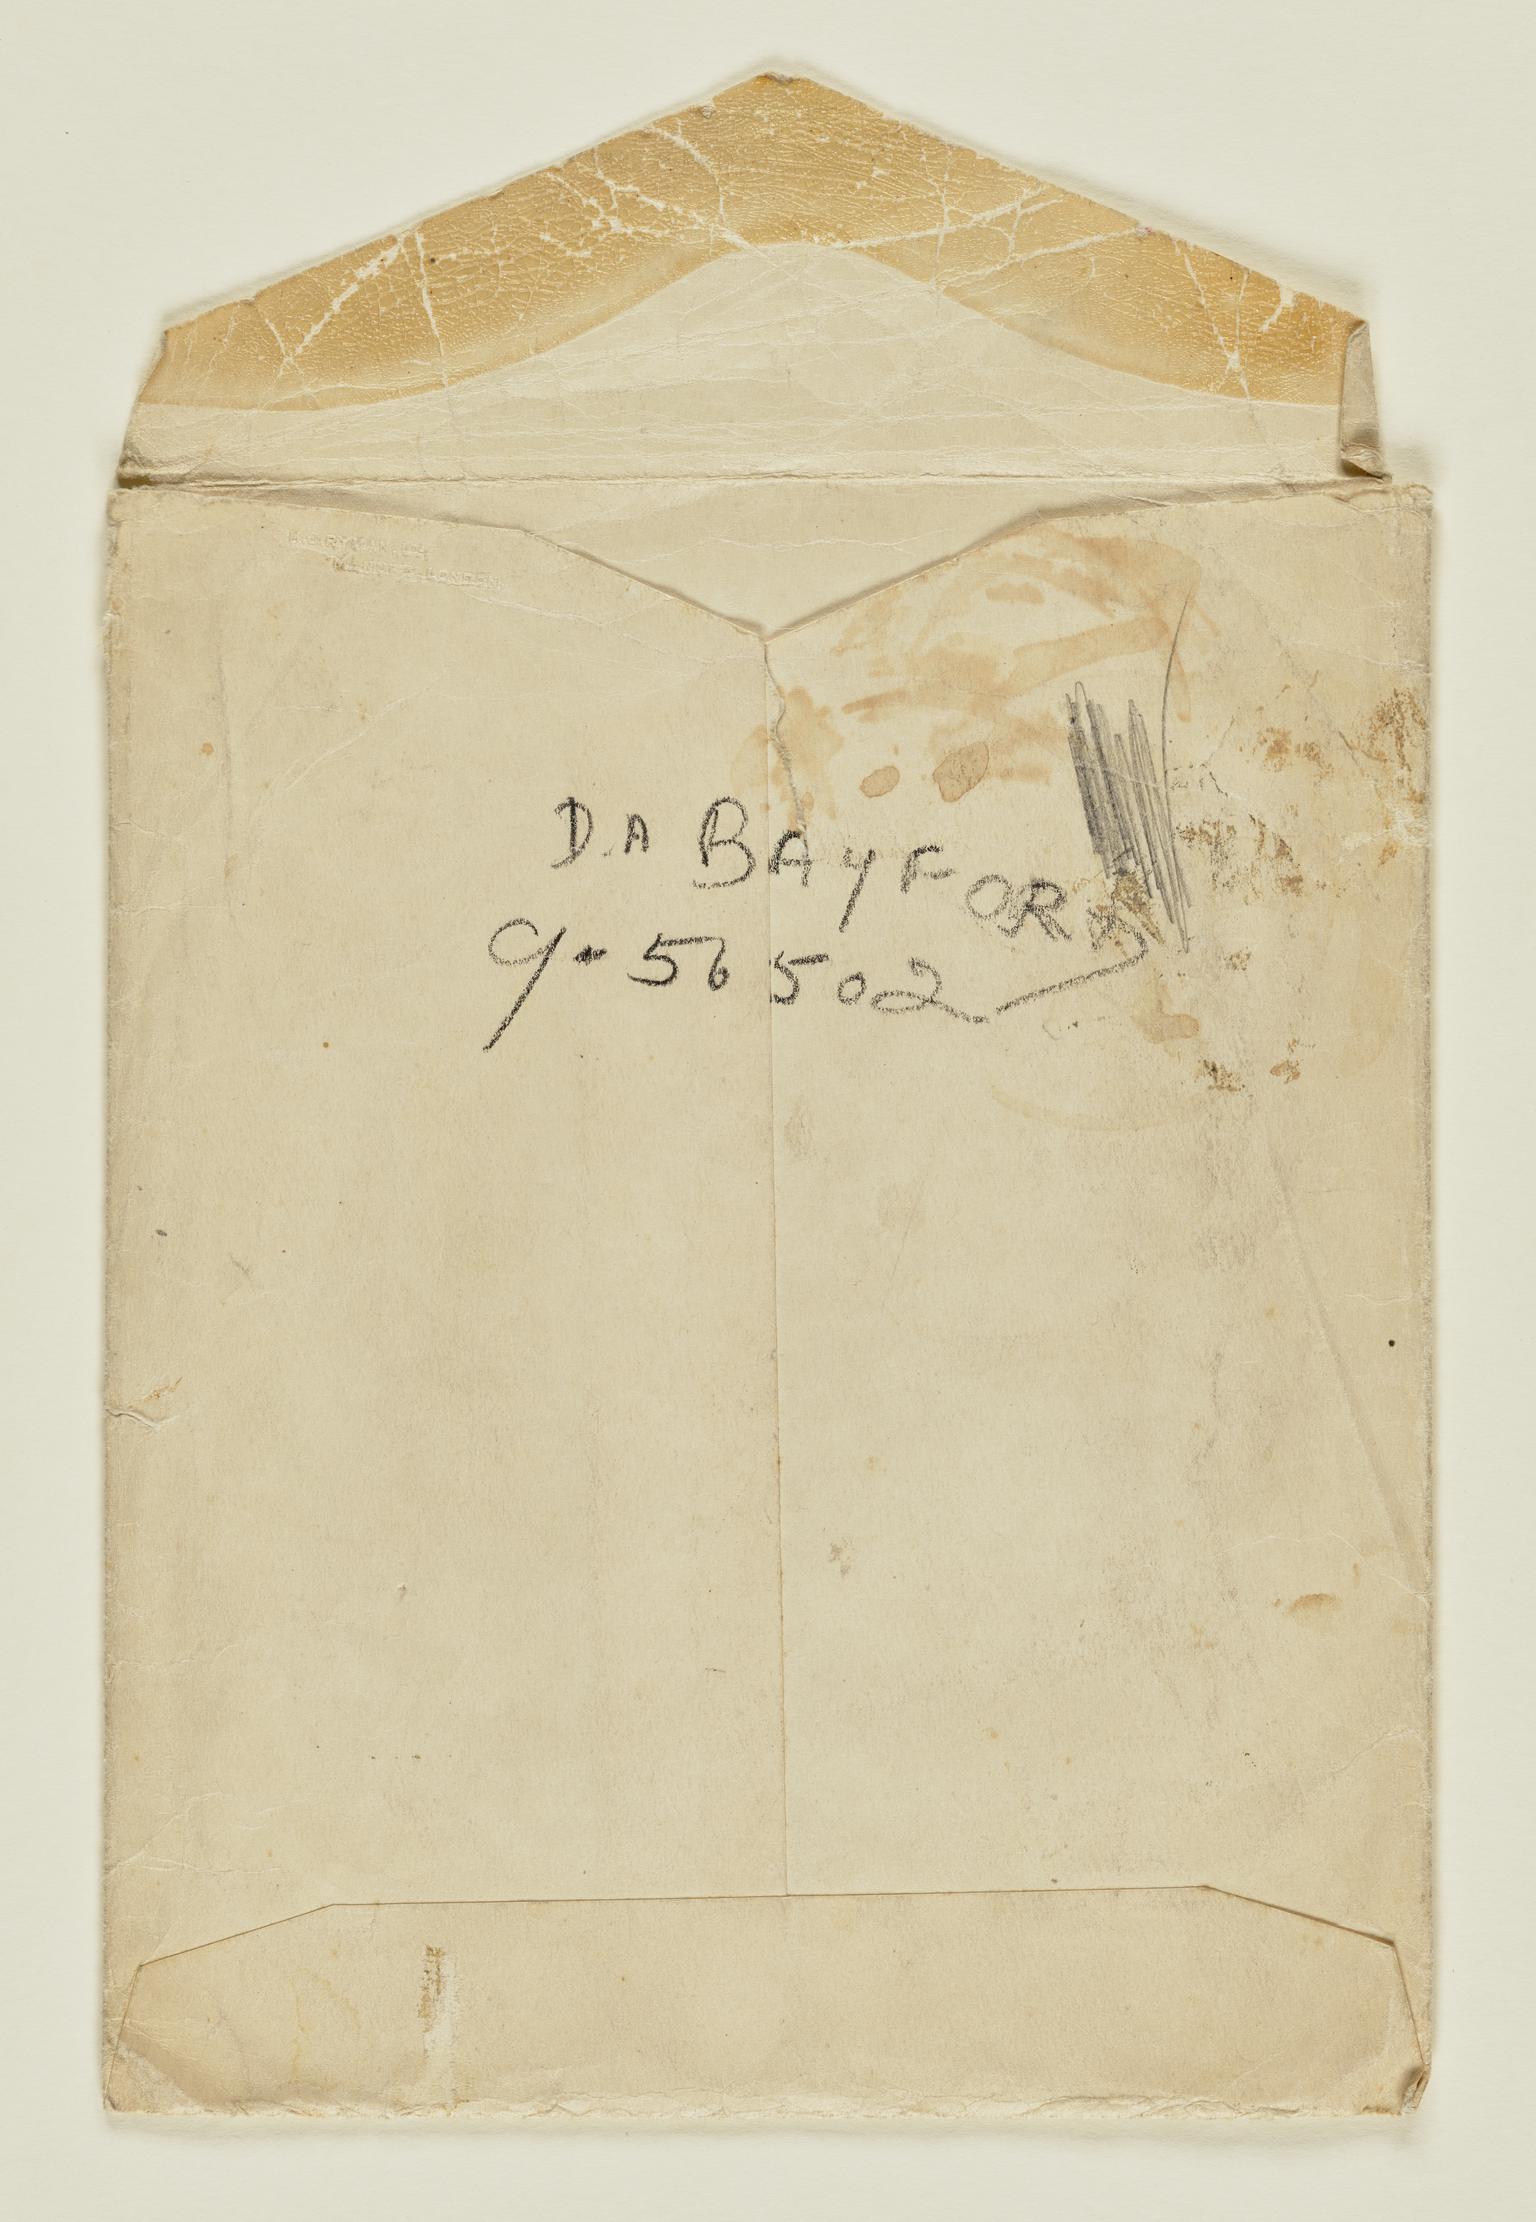 Envelope for "Town Child's Alphabet Drawings"